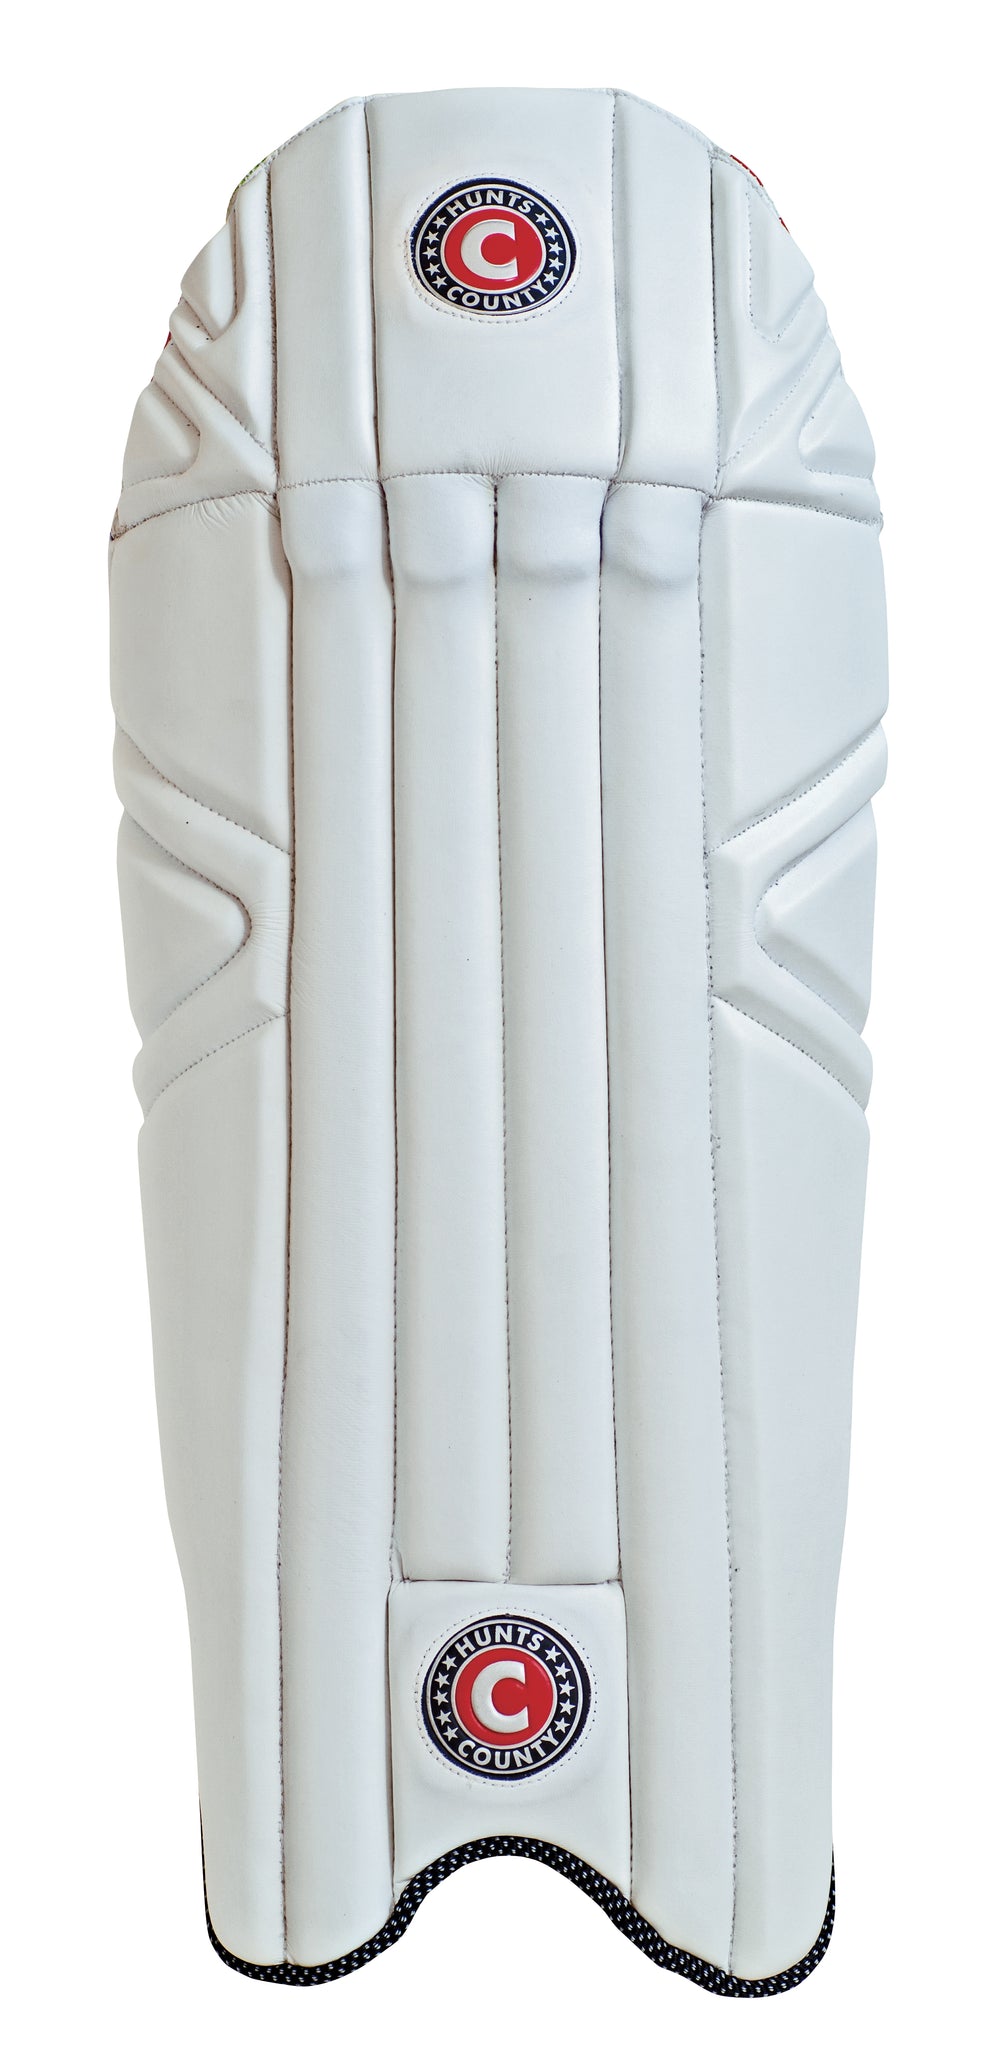 Hunts County Aura Wicket Keeping Pads